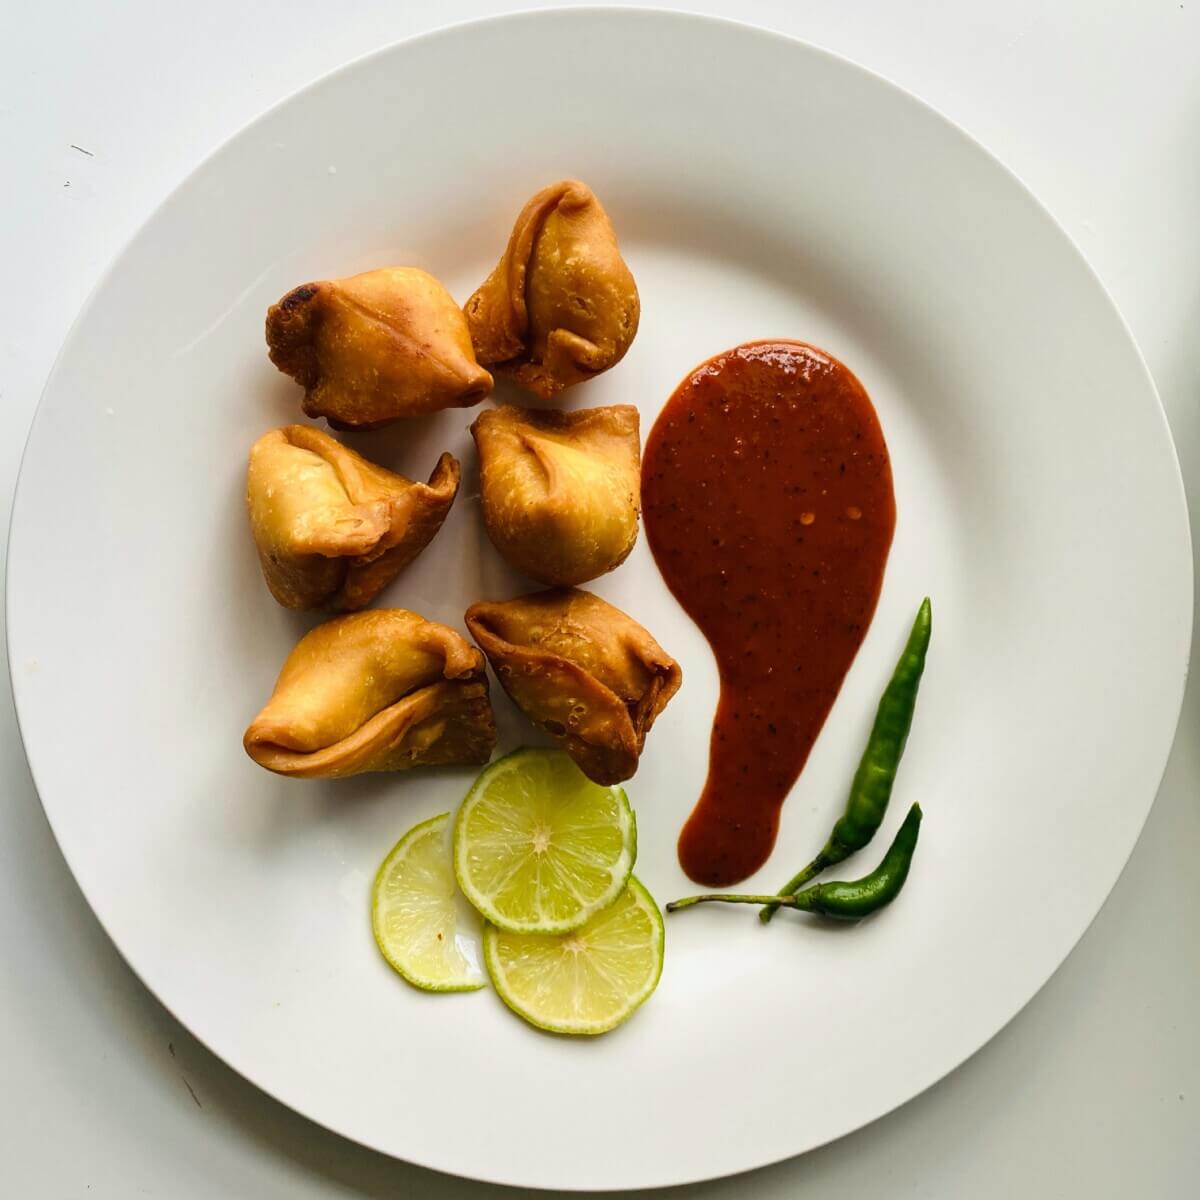 Samosas are one of the best Indian foods to try, experts say.